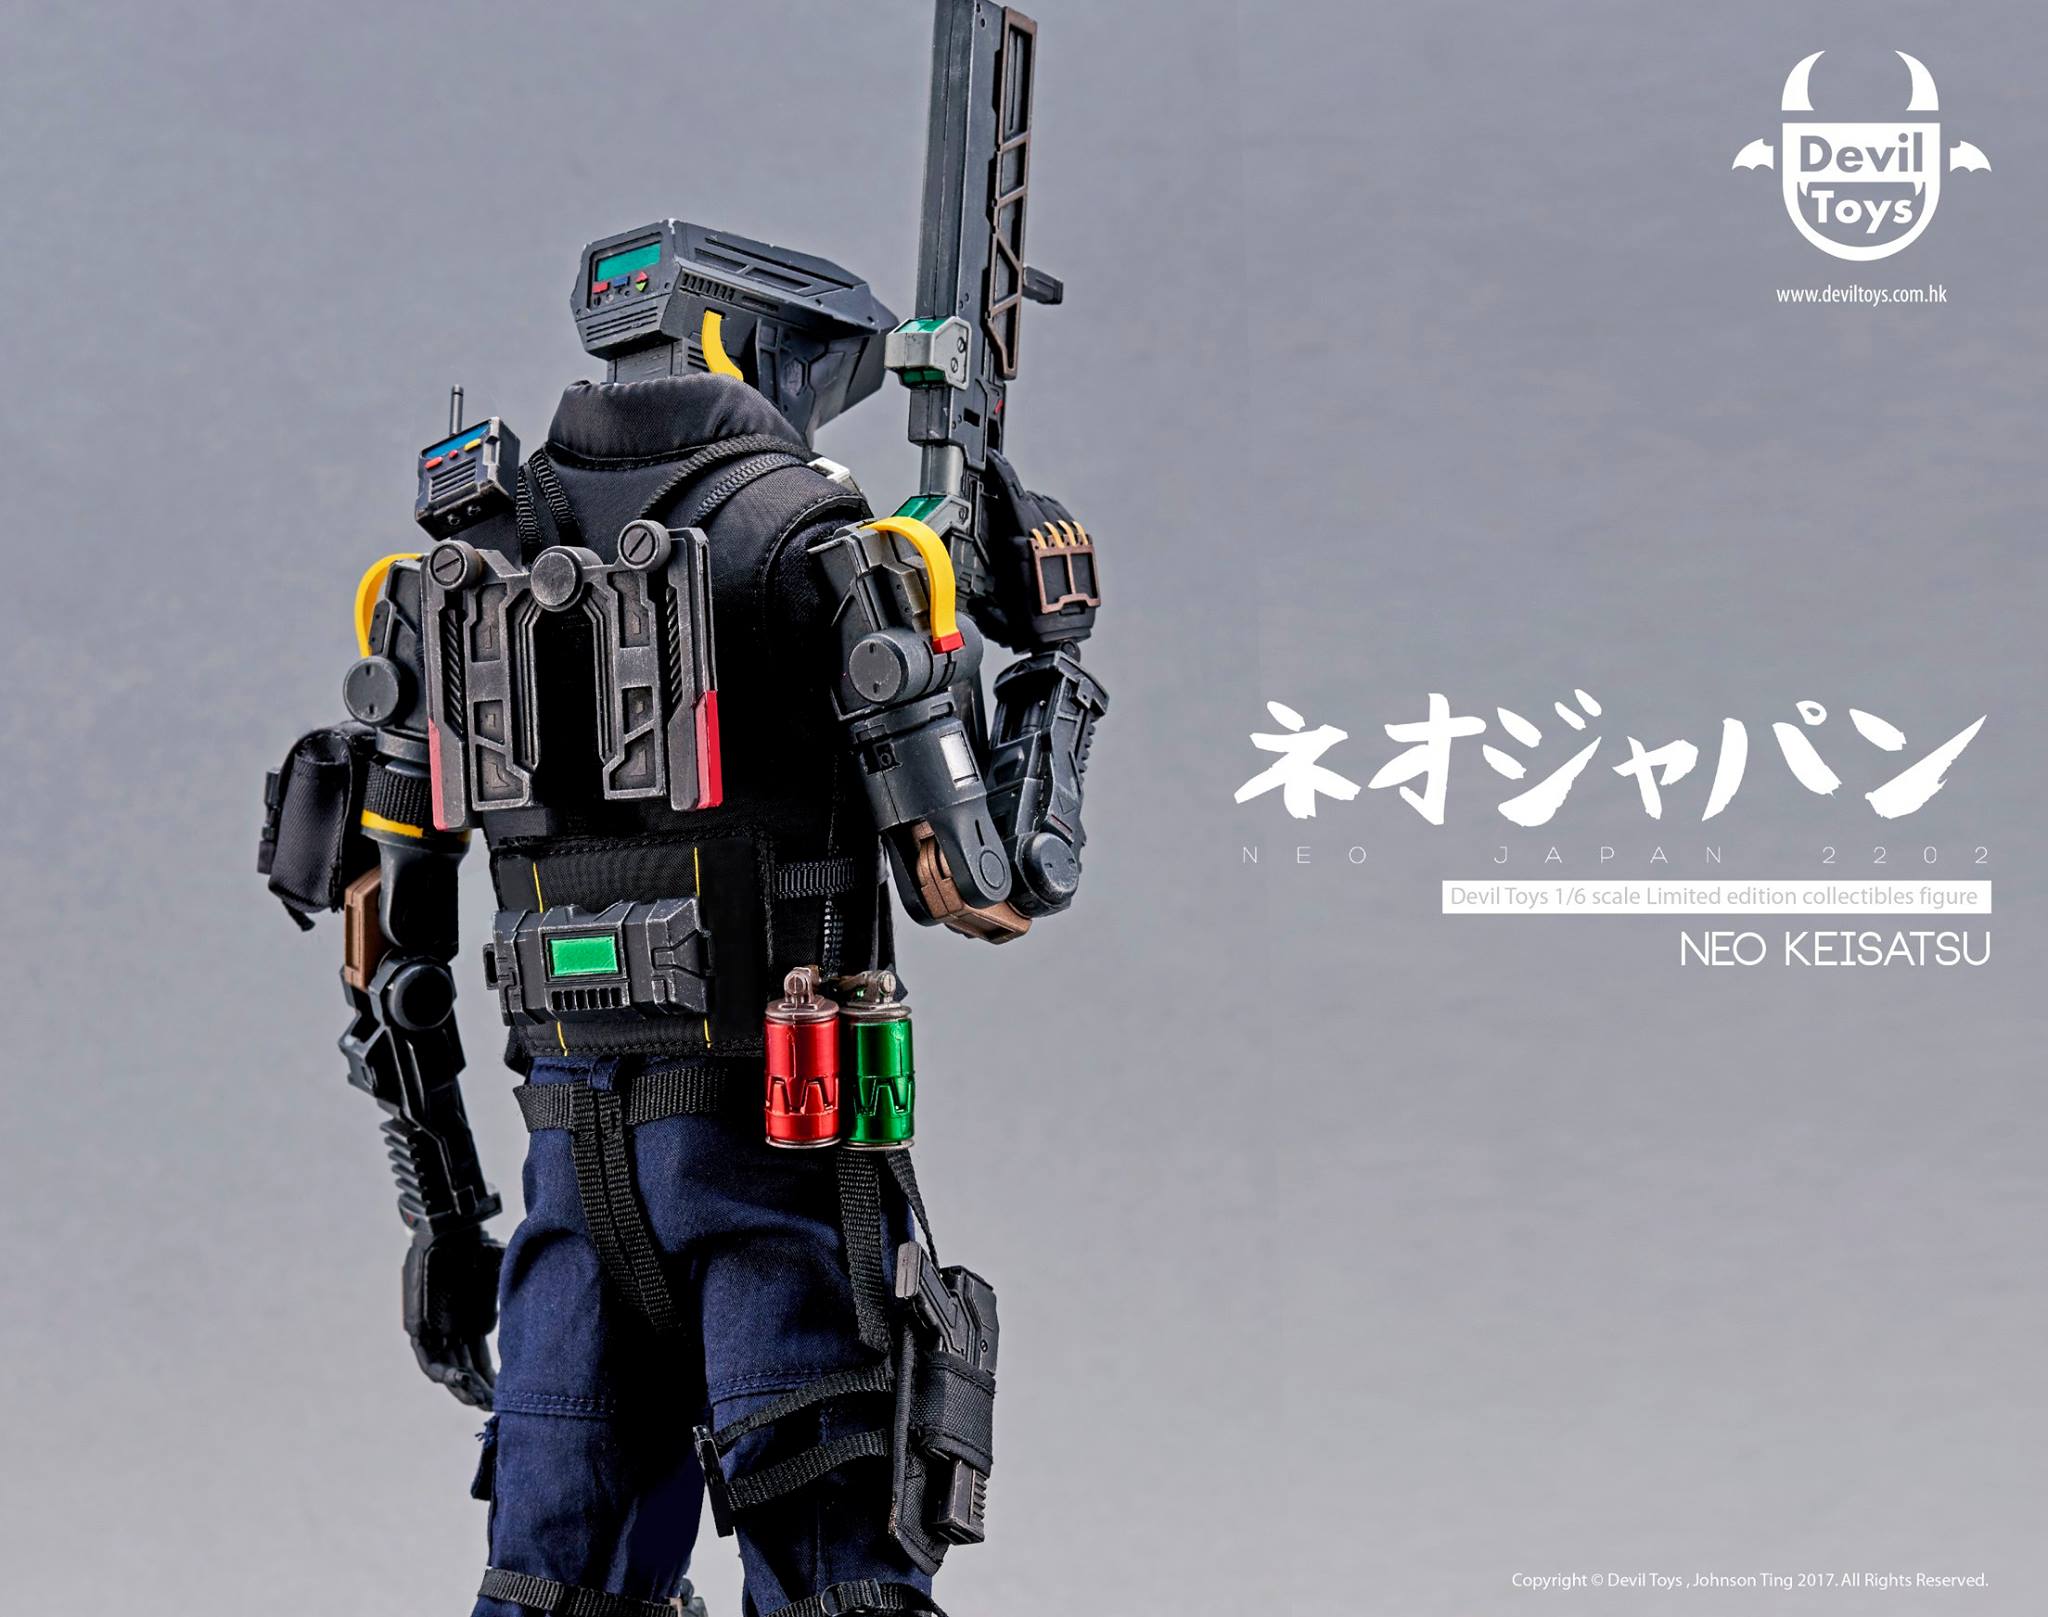 Artist’s Cyberpunk Project Gets Turned Into An Action Figure